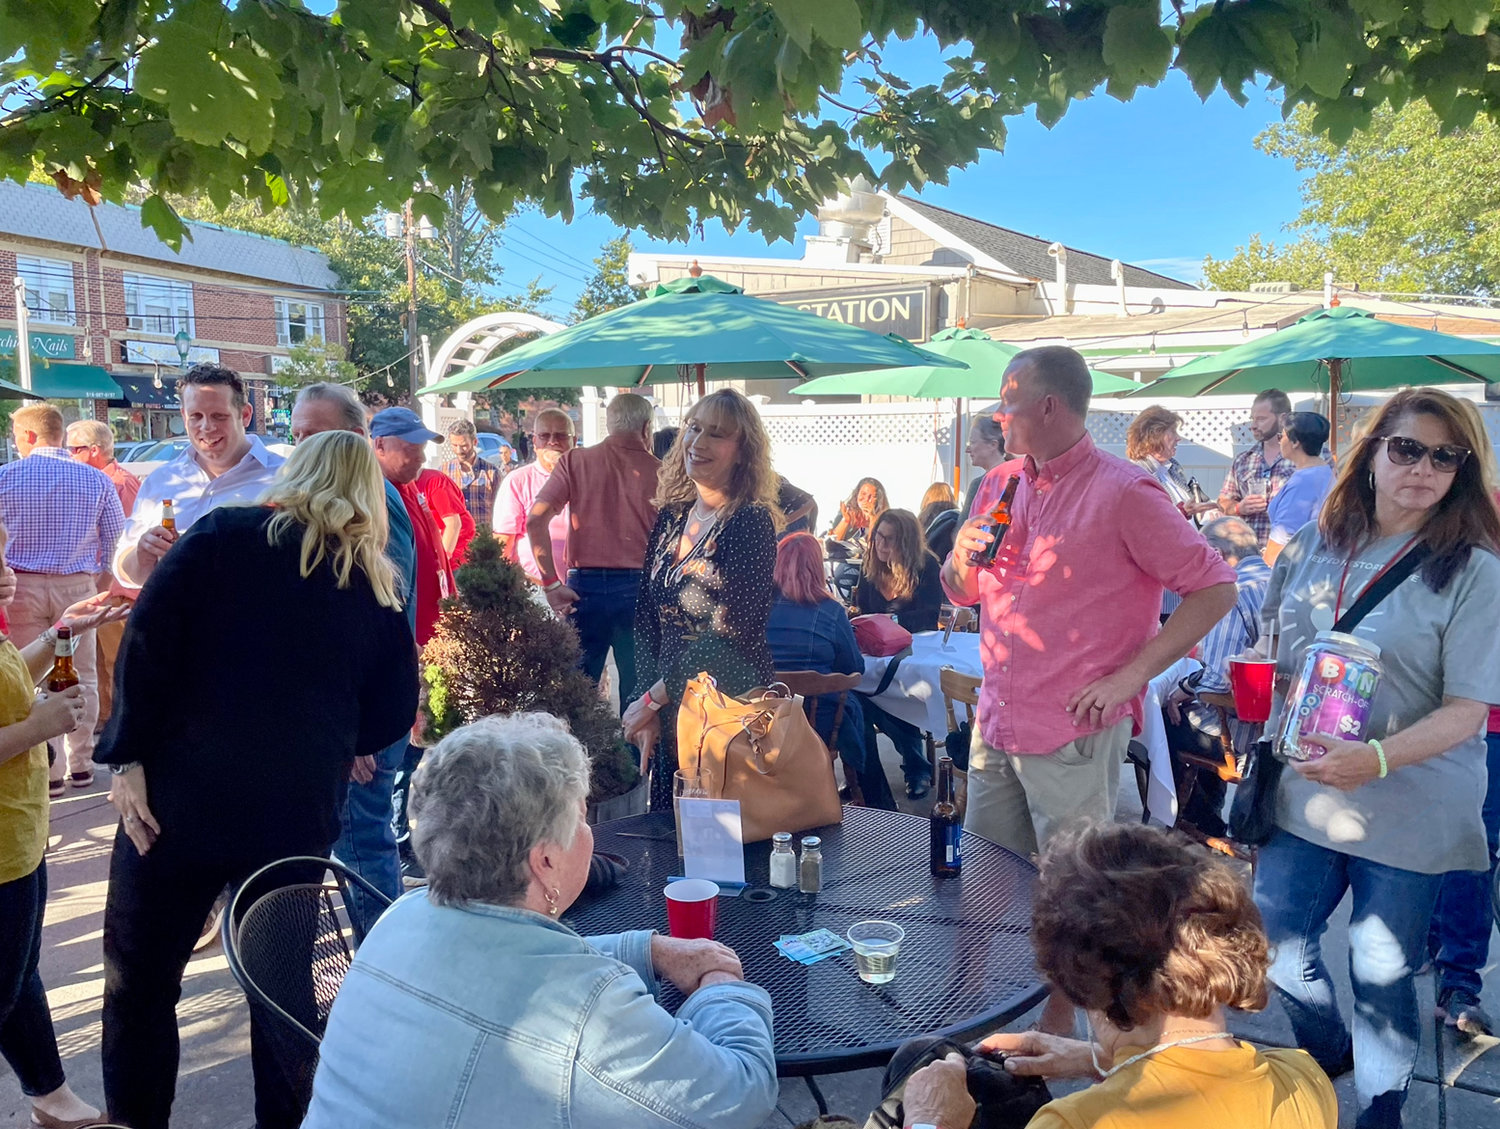 Over 150 people bought tickets to a happy hour fundraiser for the Solinto family held at Connolly Station restaurant. Over $5,000 was raised for the renovation of the Solintos’ home, which will help in the car of son Phillip, who has cerebral palsy.